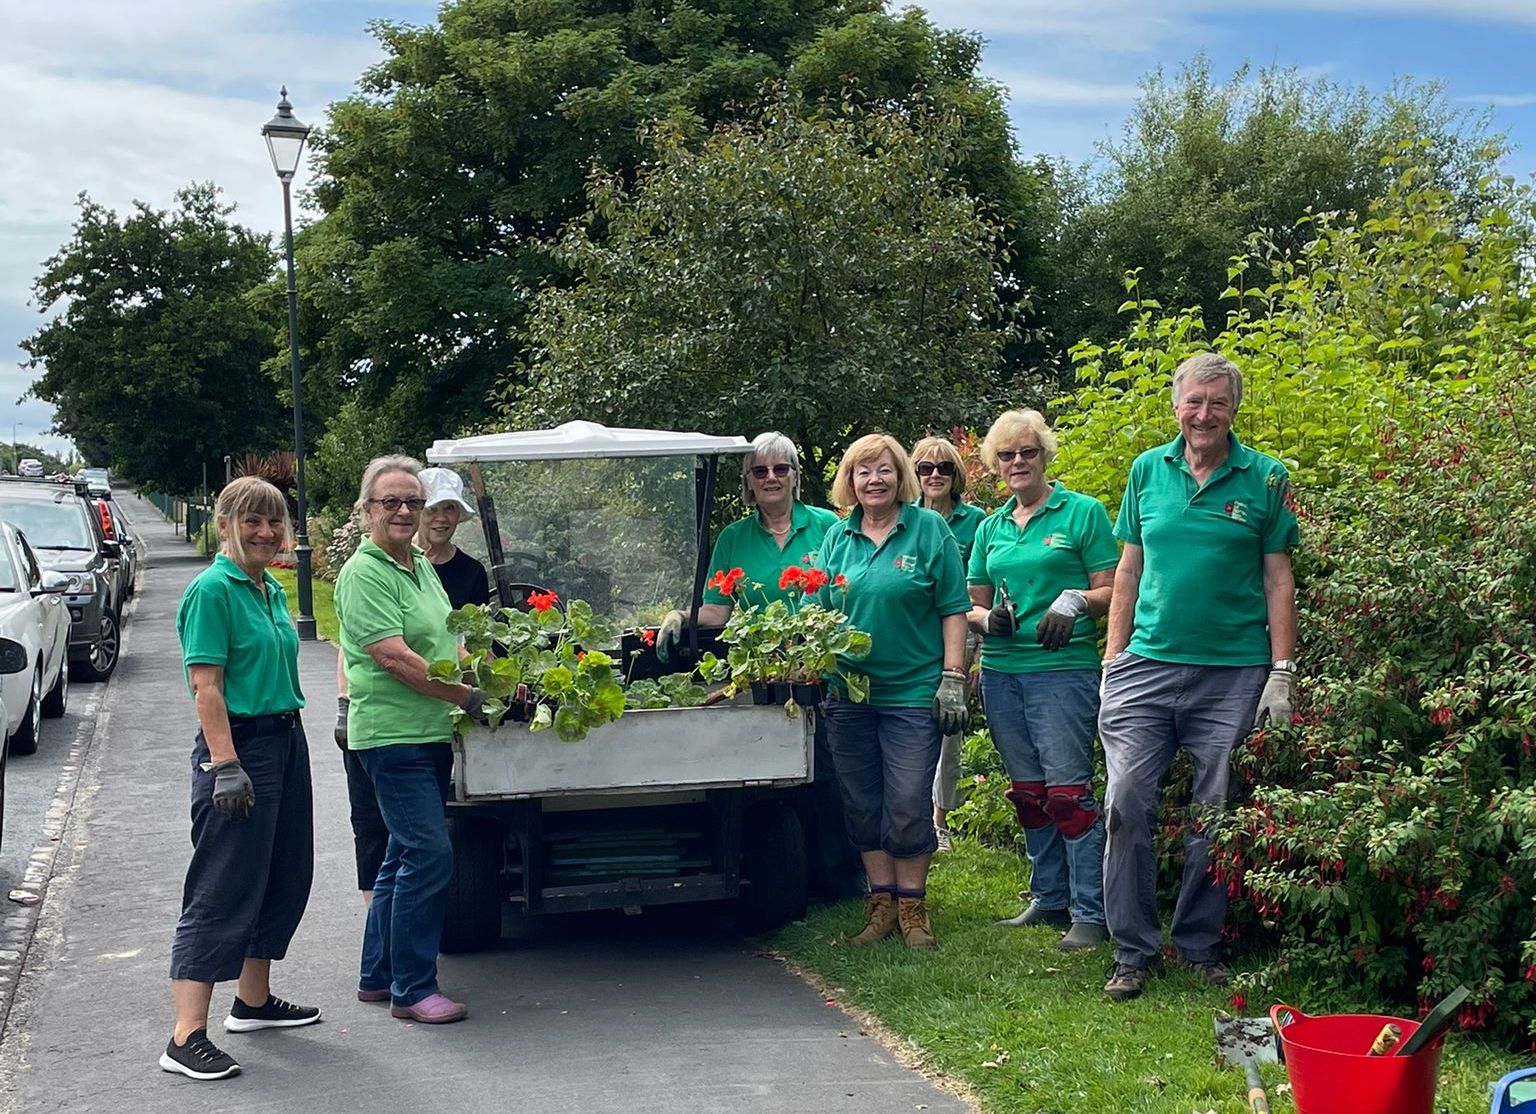 Rotten Row in Southport is celebrating its 100th anniversary. The herbaceous border is largely maintained by volunteers from the Friends Of Rotten Row